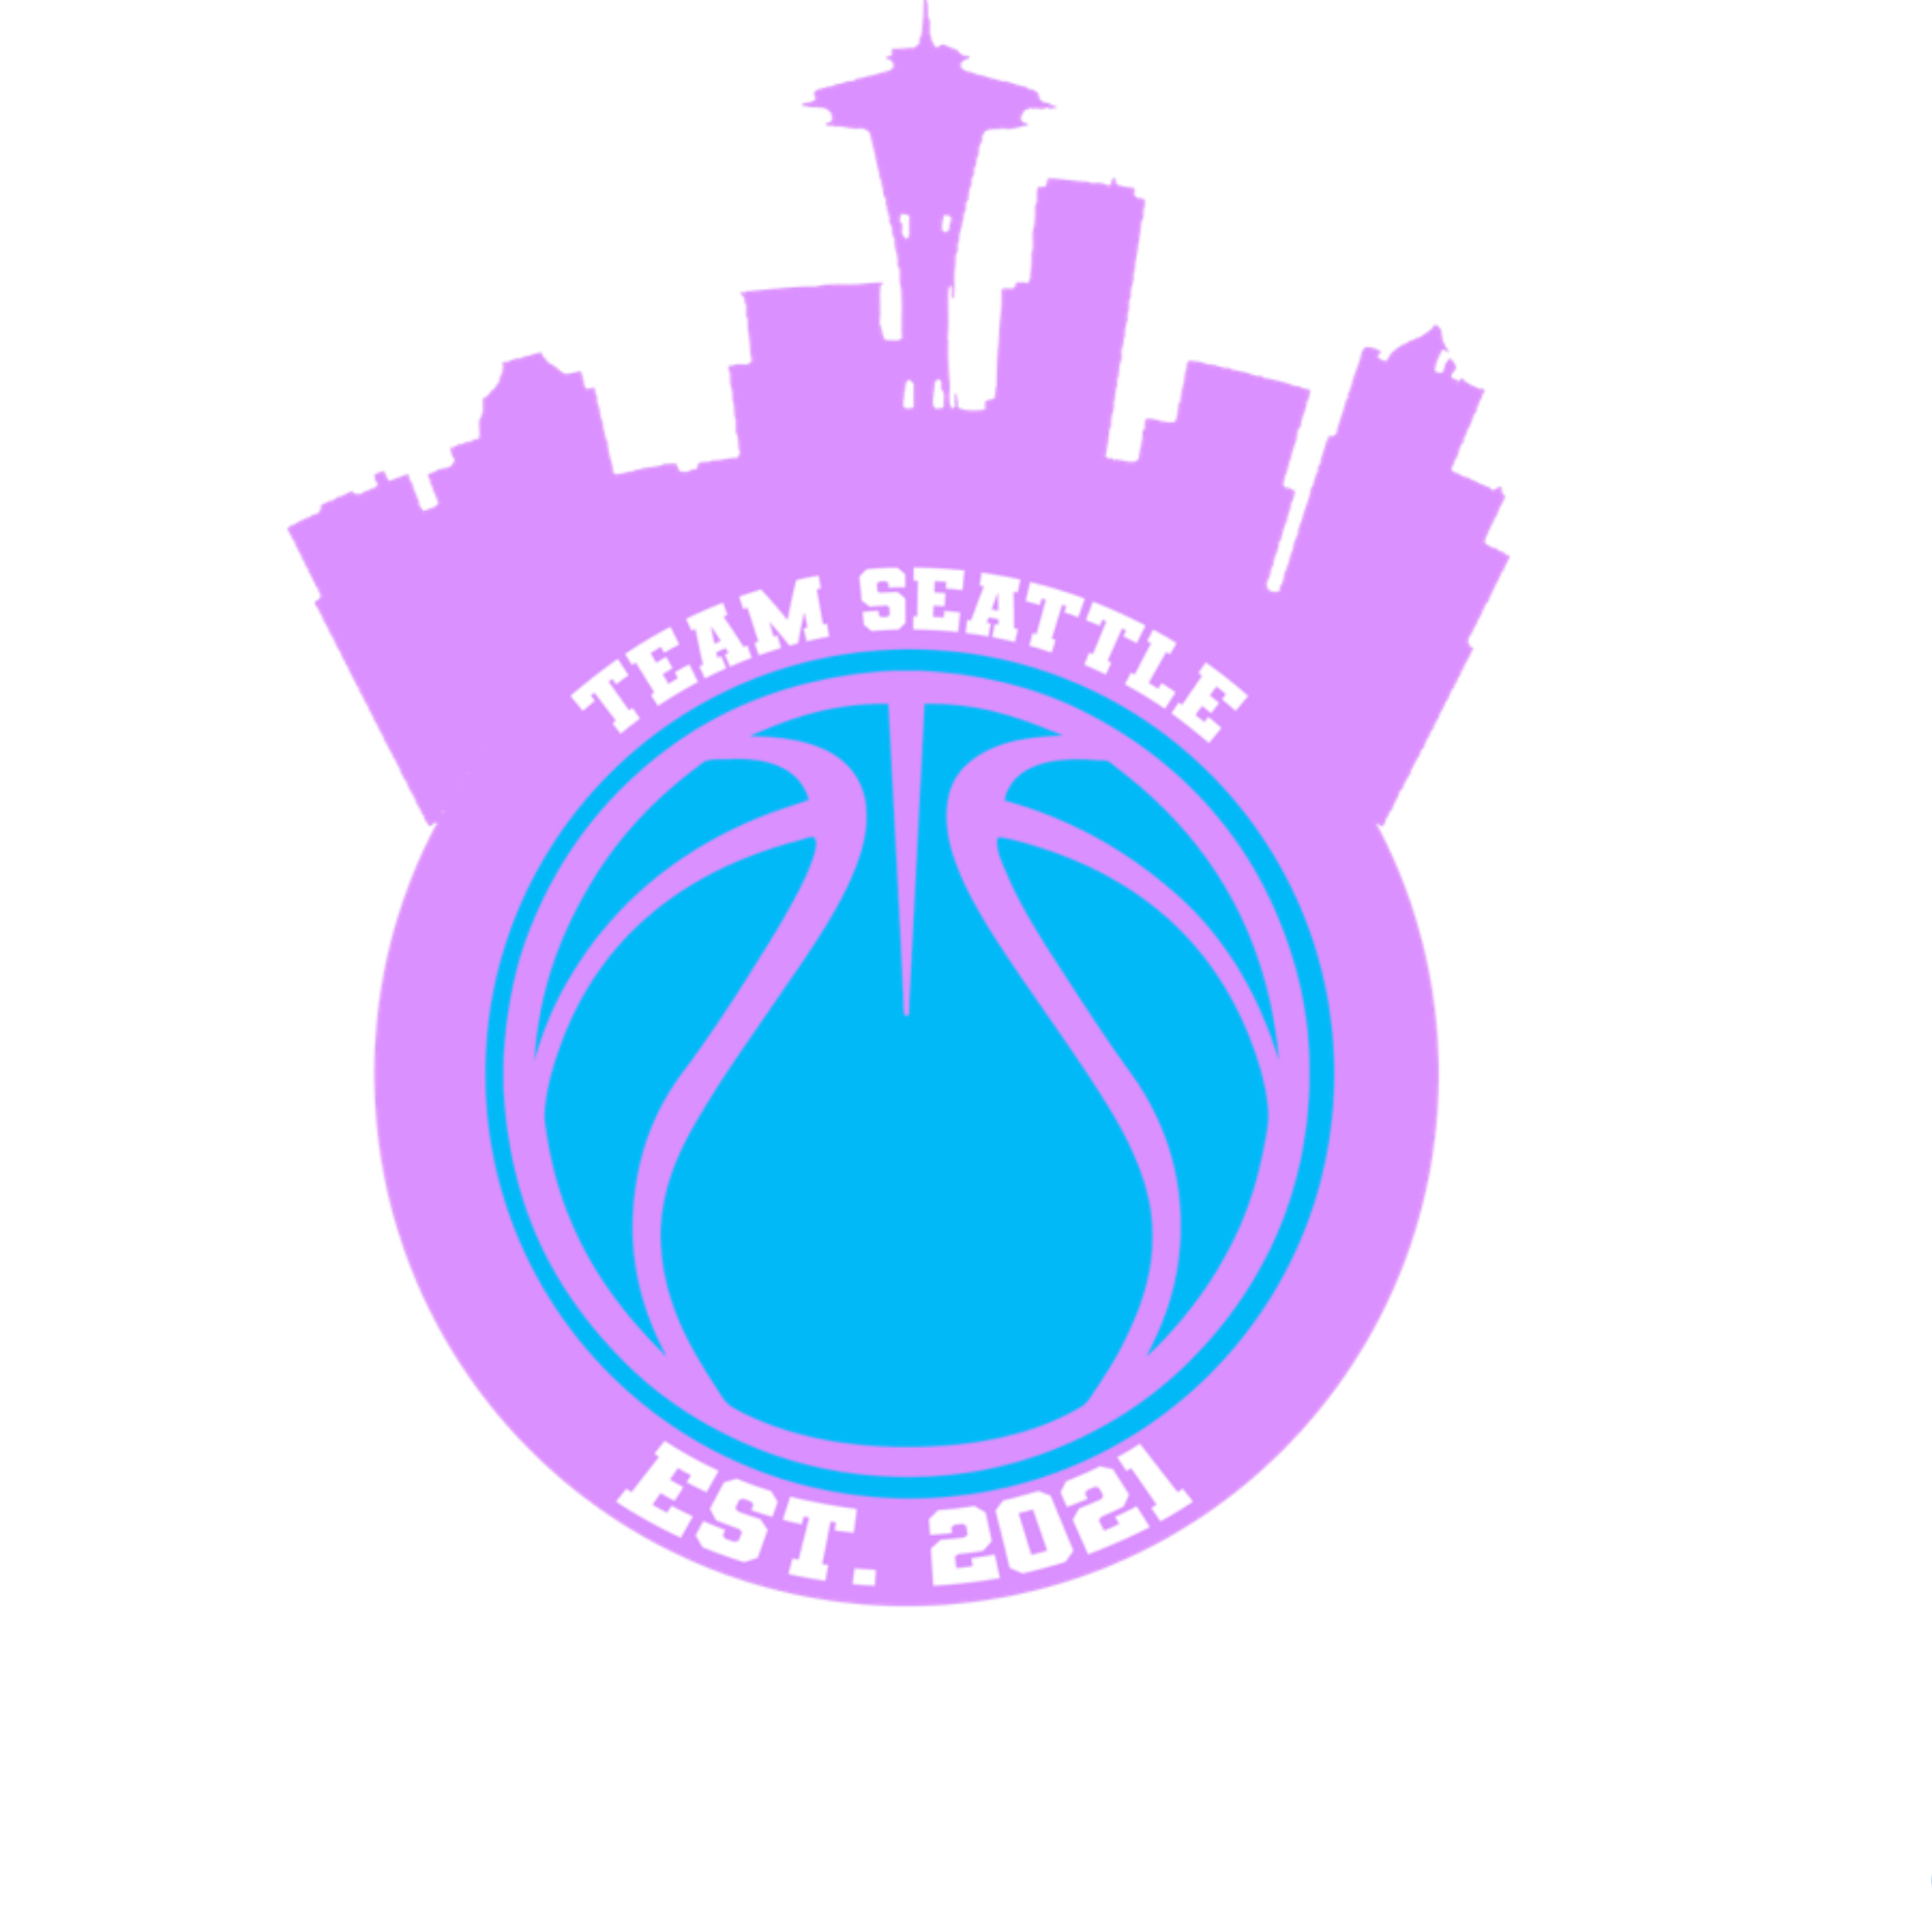 The official logo of Team Seattle